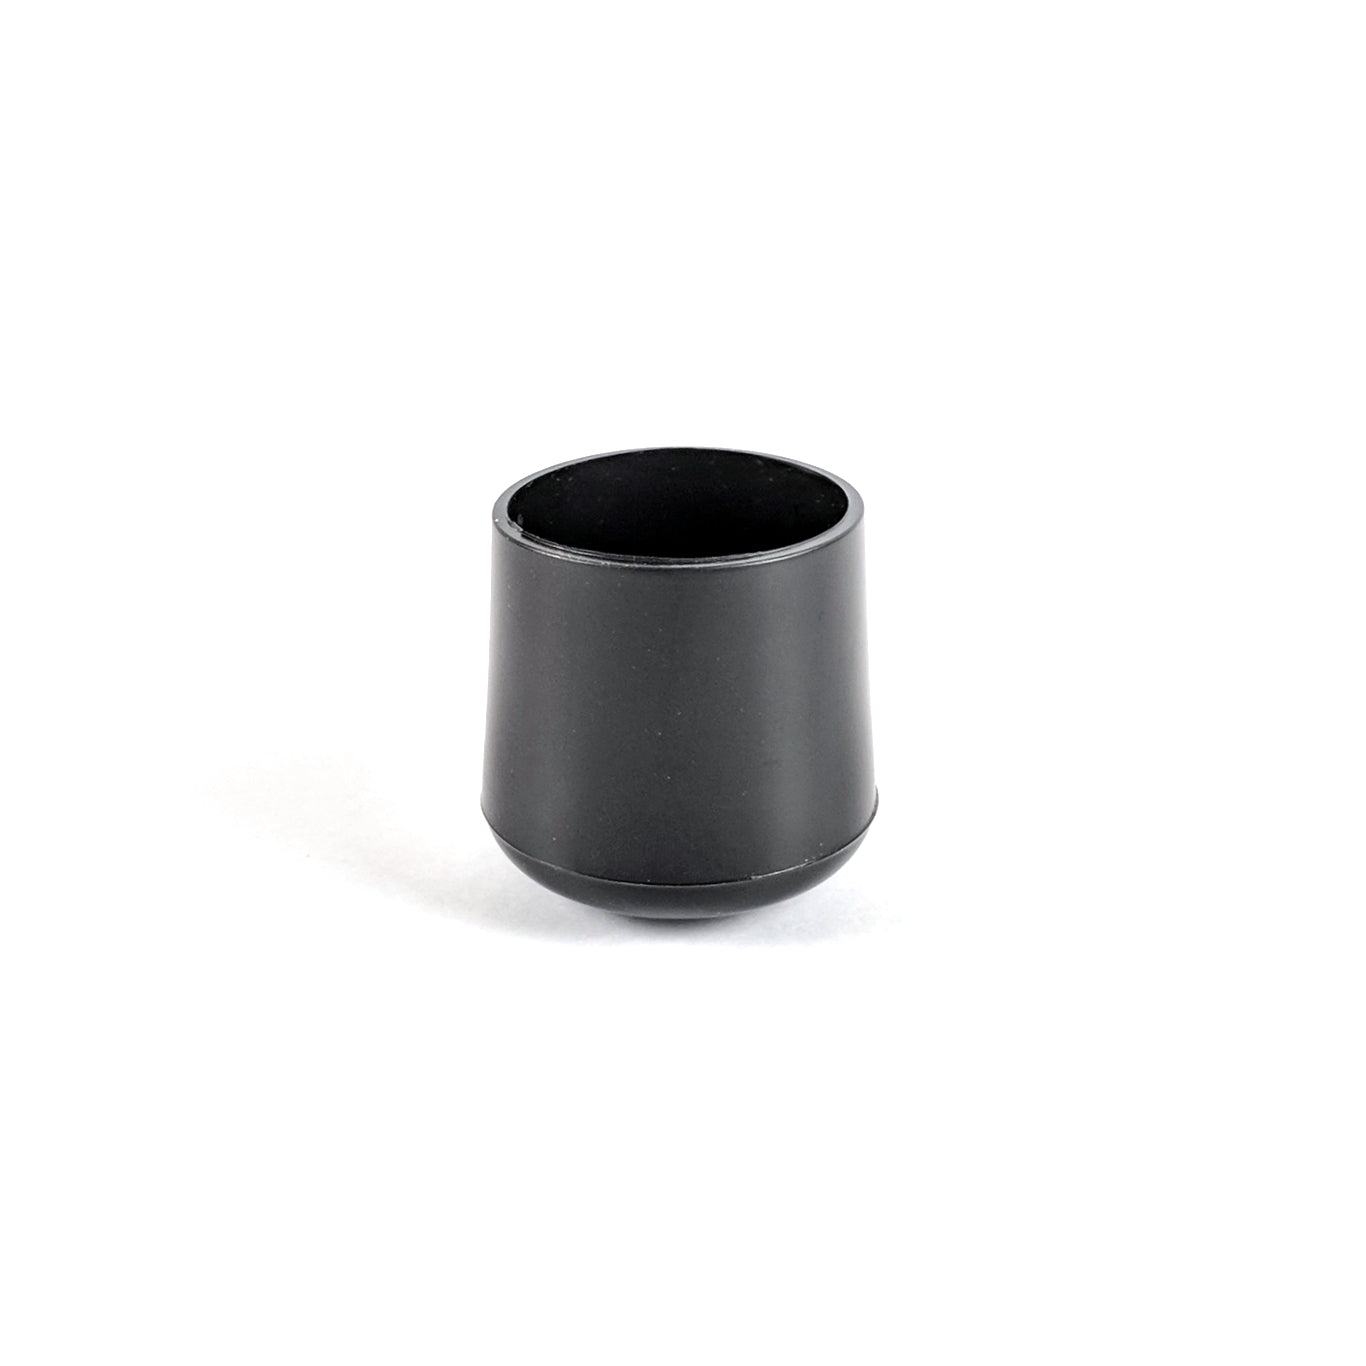 33.5mm Black Rubber Ferrules with Steel Base Insert - Made in Germany - Keay Vital Parts